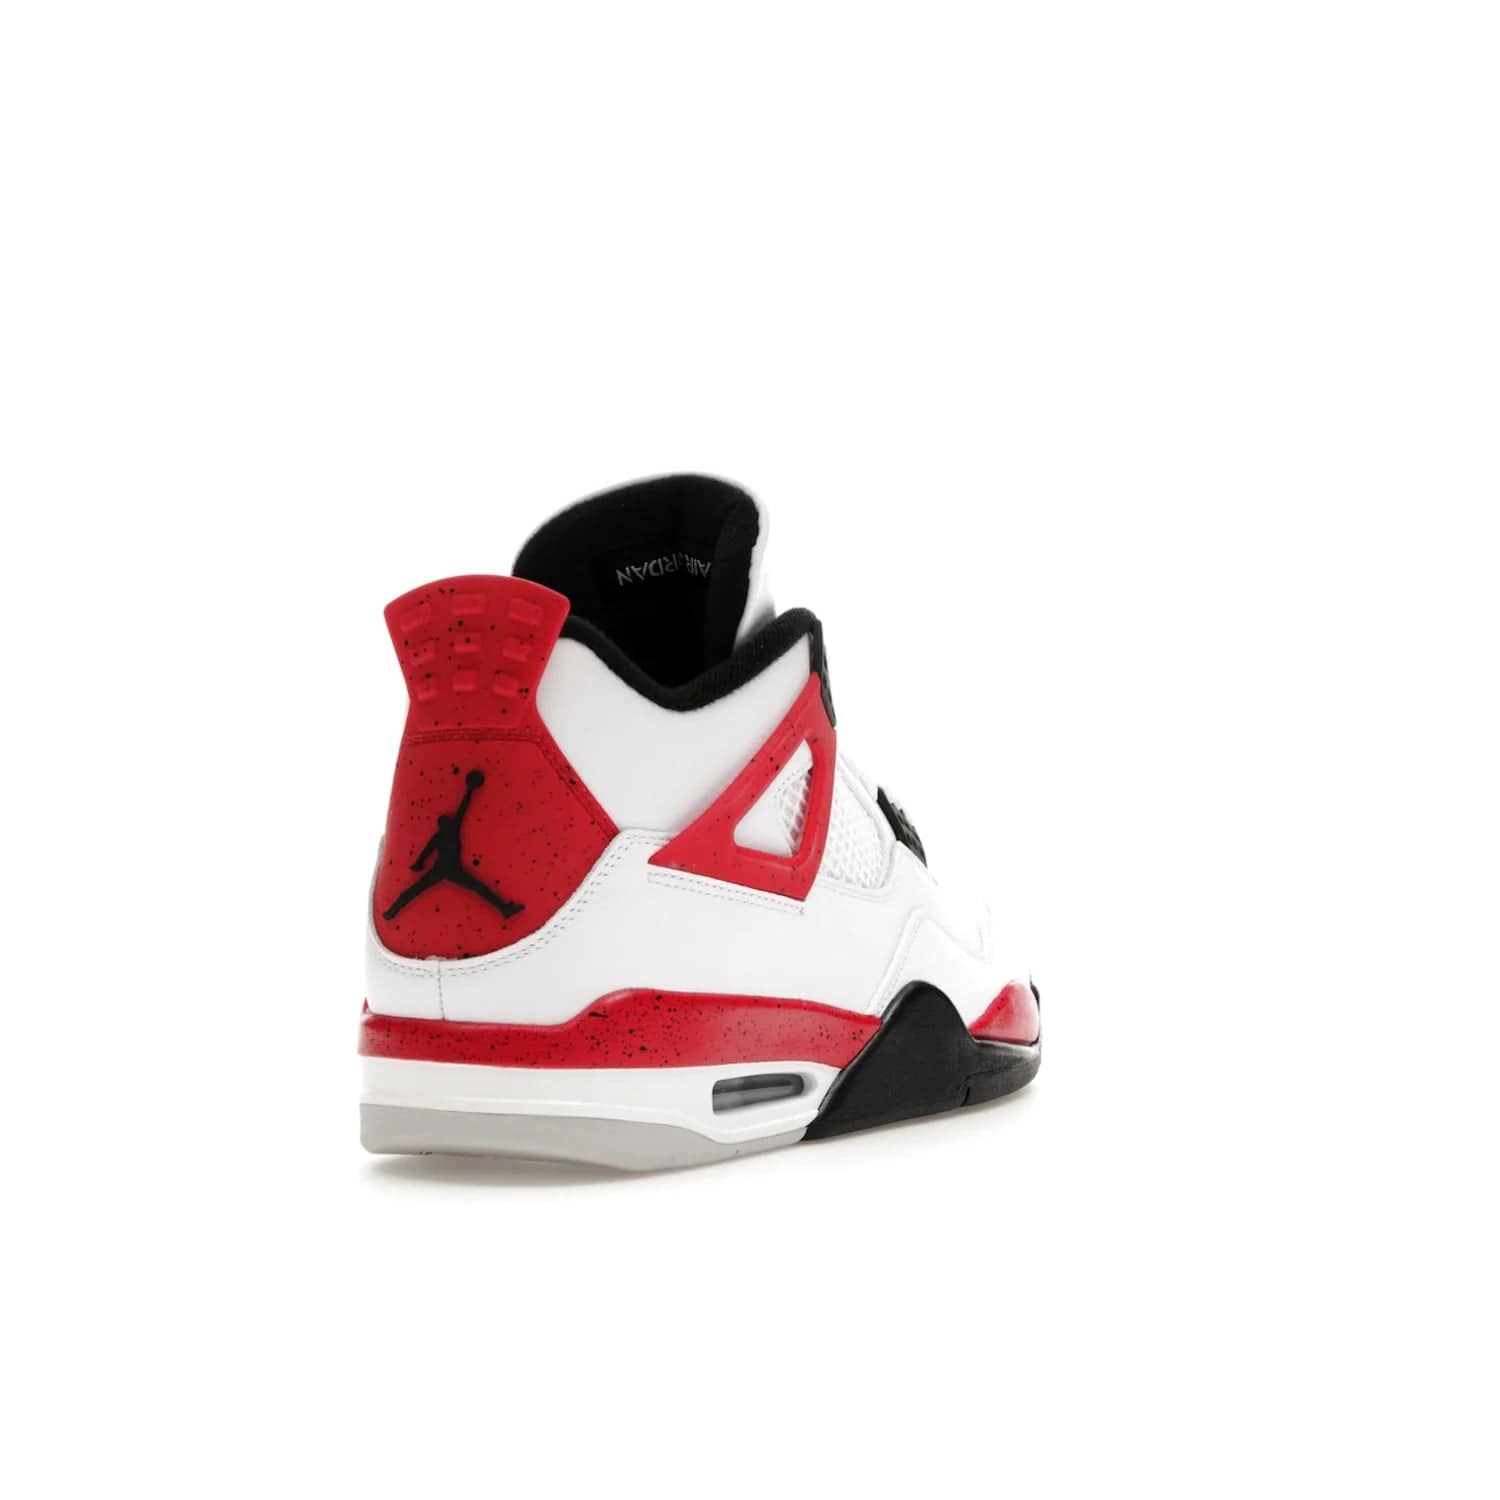 Jordan 4 Retro Red Cement - Image 31 - Only at www.BallersClubKickz.com - Iconic Jordan silhouette with a unique twist. White premium leather uppers with fire red and black detailing. Black, white, and fire red midsole with mesh detailing and Jumpman logo. Jordan 4 Retro Red Cement released with premium price.